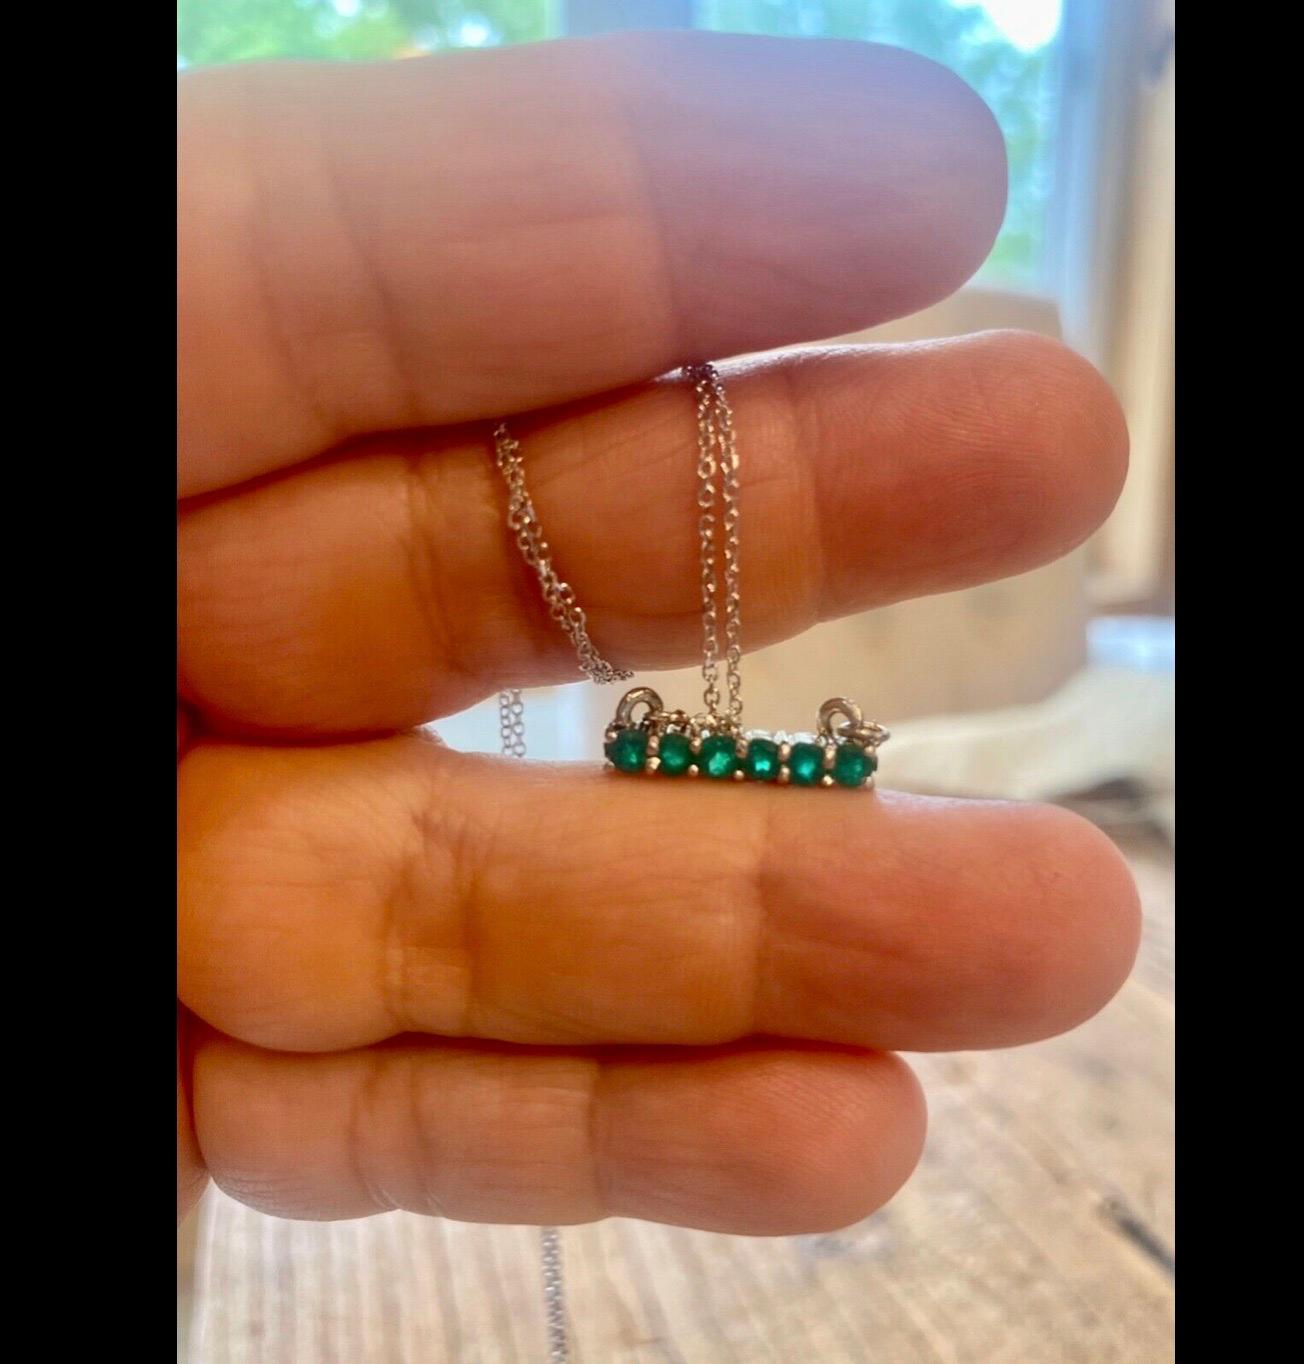 Stunning AAA Colombian Emerald, VS- Clarity. Set in Gorgeous Multistone Pendant Chain Fashion Necklace. Total Colombian Emerald Weight 1.00 Carat. 18K white gold 3.3g. Length 18